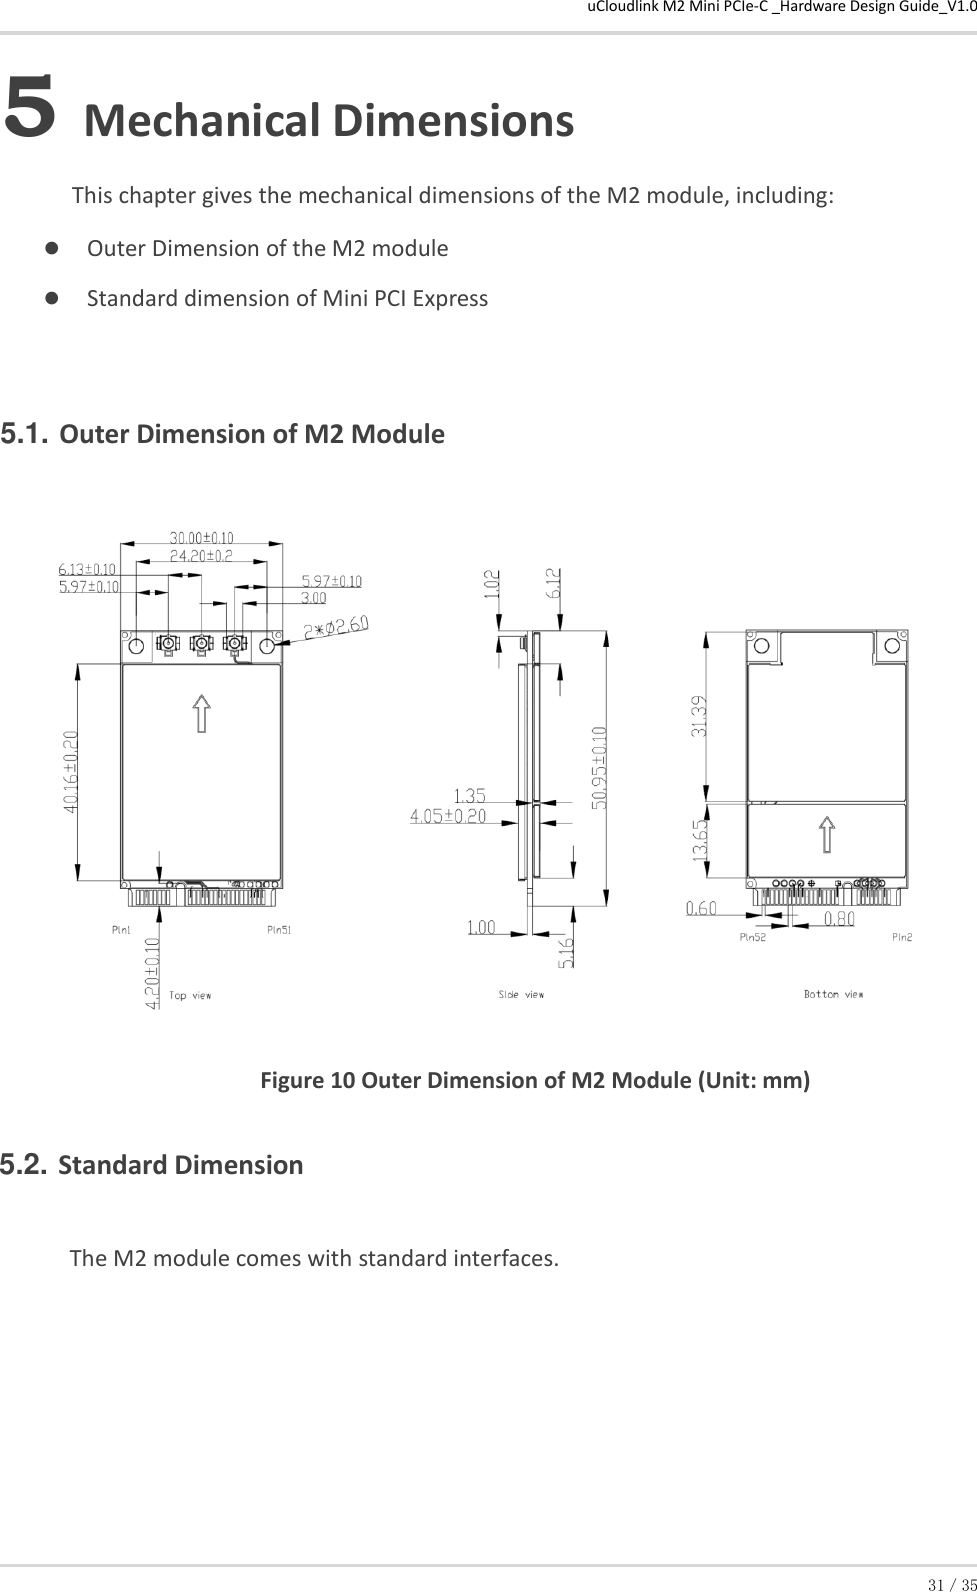 uCloudlink M2 Mini PCIe-C _Hardware Design Guide_V1.0 31／35 5 Mechanical Dimensions This chapter gives the mechanical dimensions of the M2 module, including:  Outer Dimension of the M2 module  Standard dimension of Mini PCI Express 5.1. Outer Dimension of M2 Module  Figure 10 Outer Dimension of M2 Module (Unit: mm)  5.2. Standard Dimension  The M2 module comes with standard interfaces.  